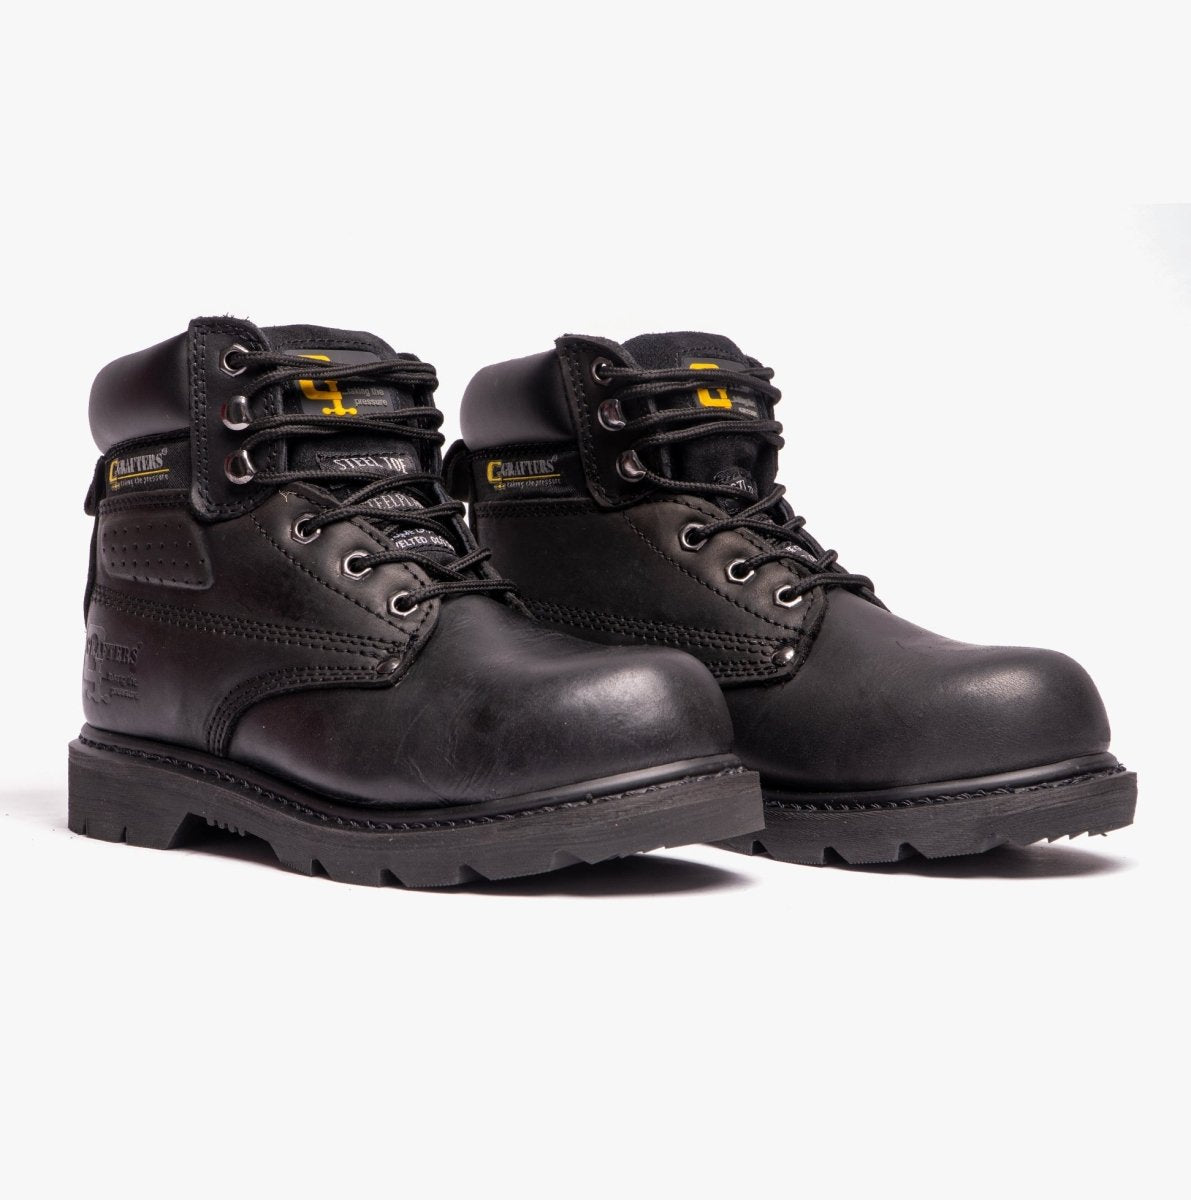 Grafters GLADIATOR Unisex Leather Safety Boots Black M538A - 3 | STB.co.uk